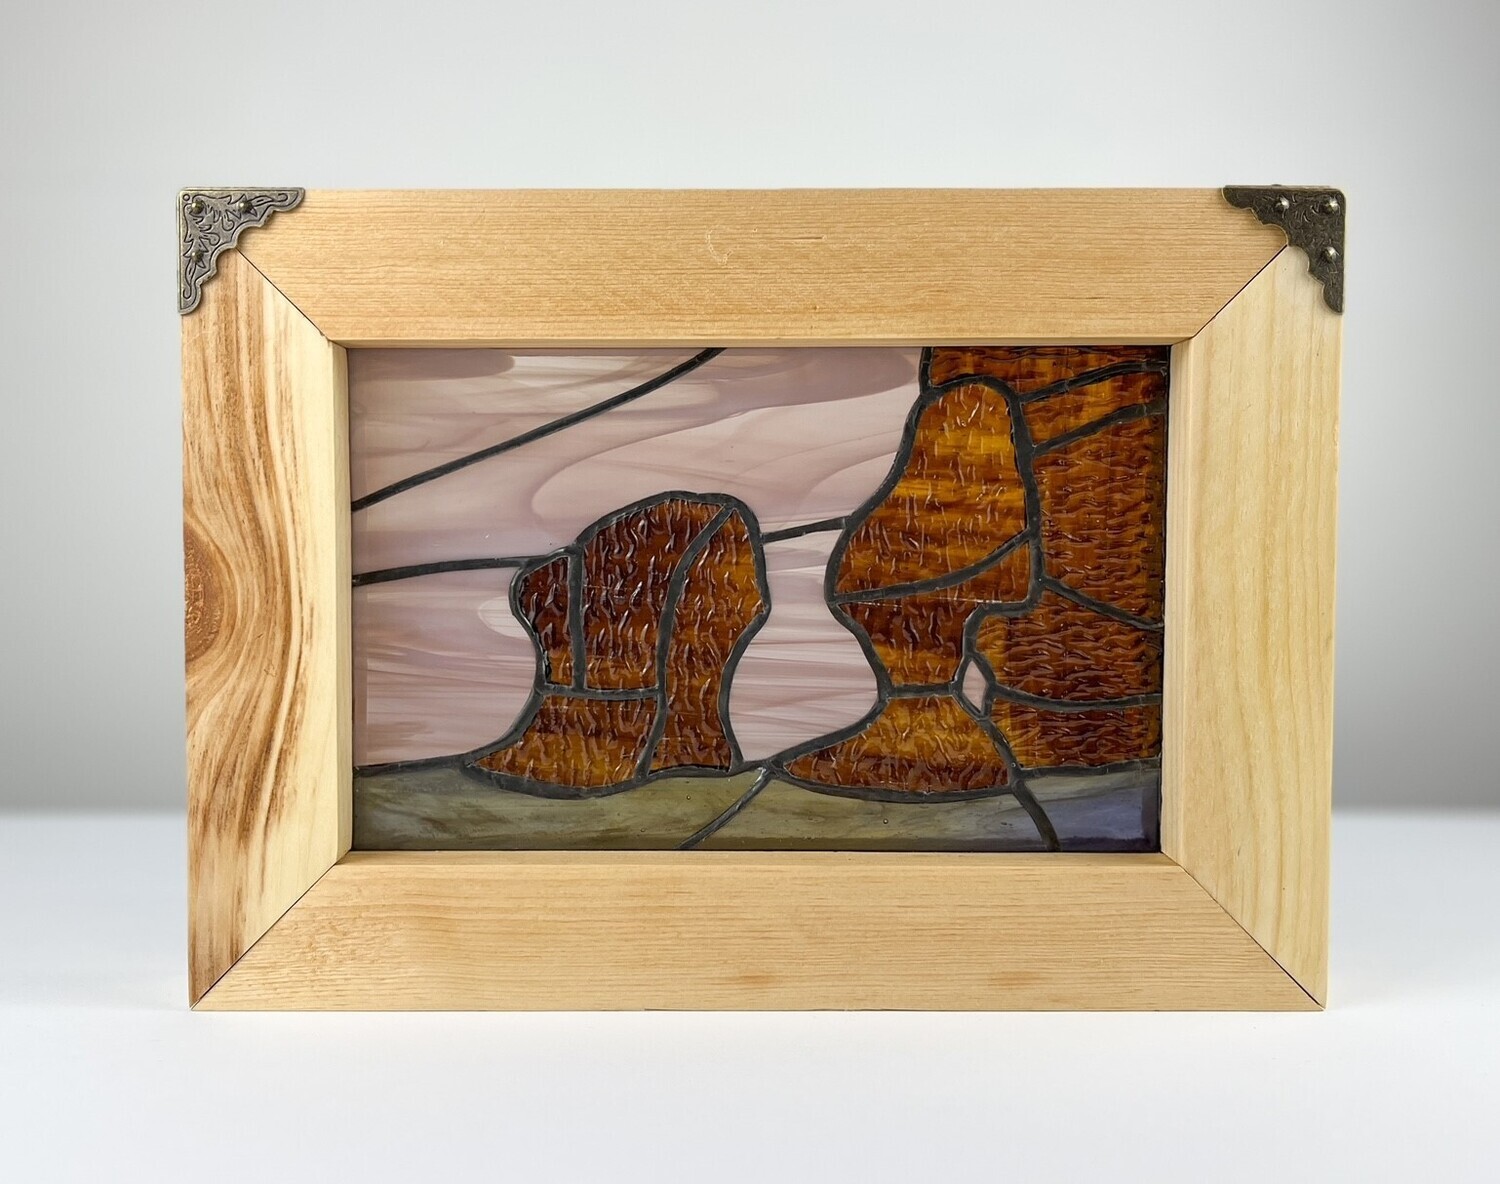 "Hopewell Rocks 3" 8x12" Framed Stained Glass